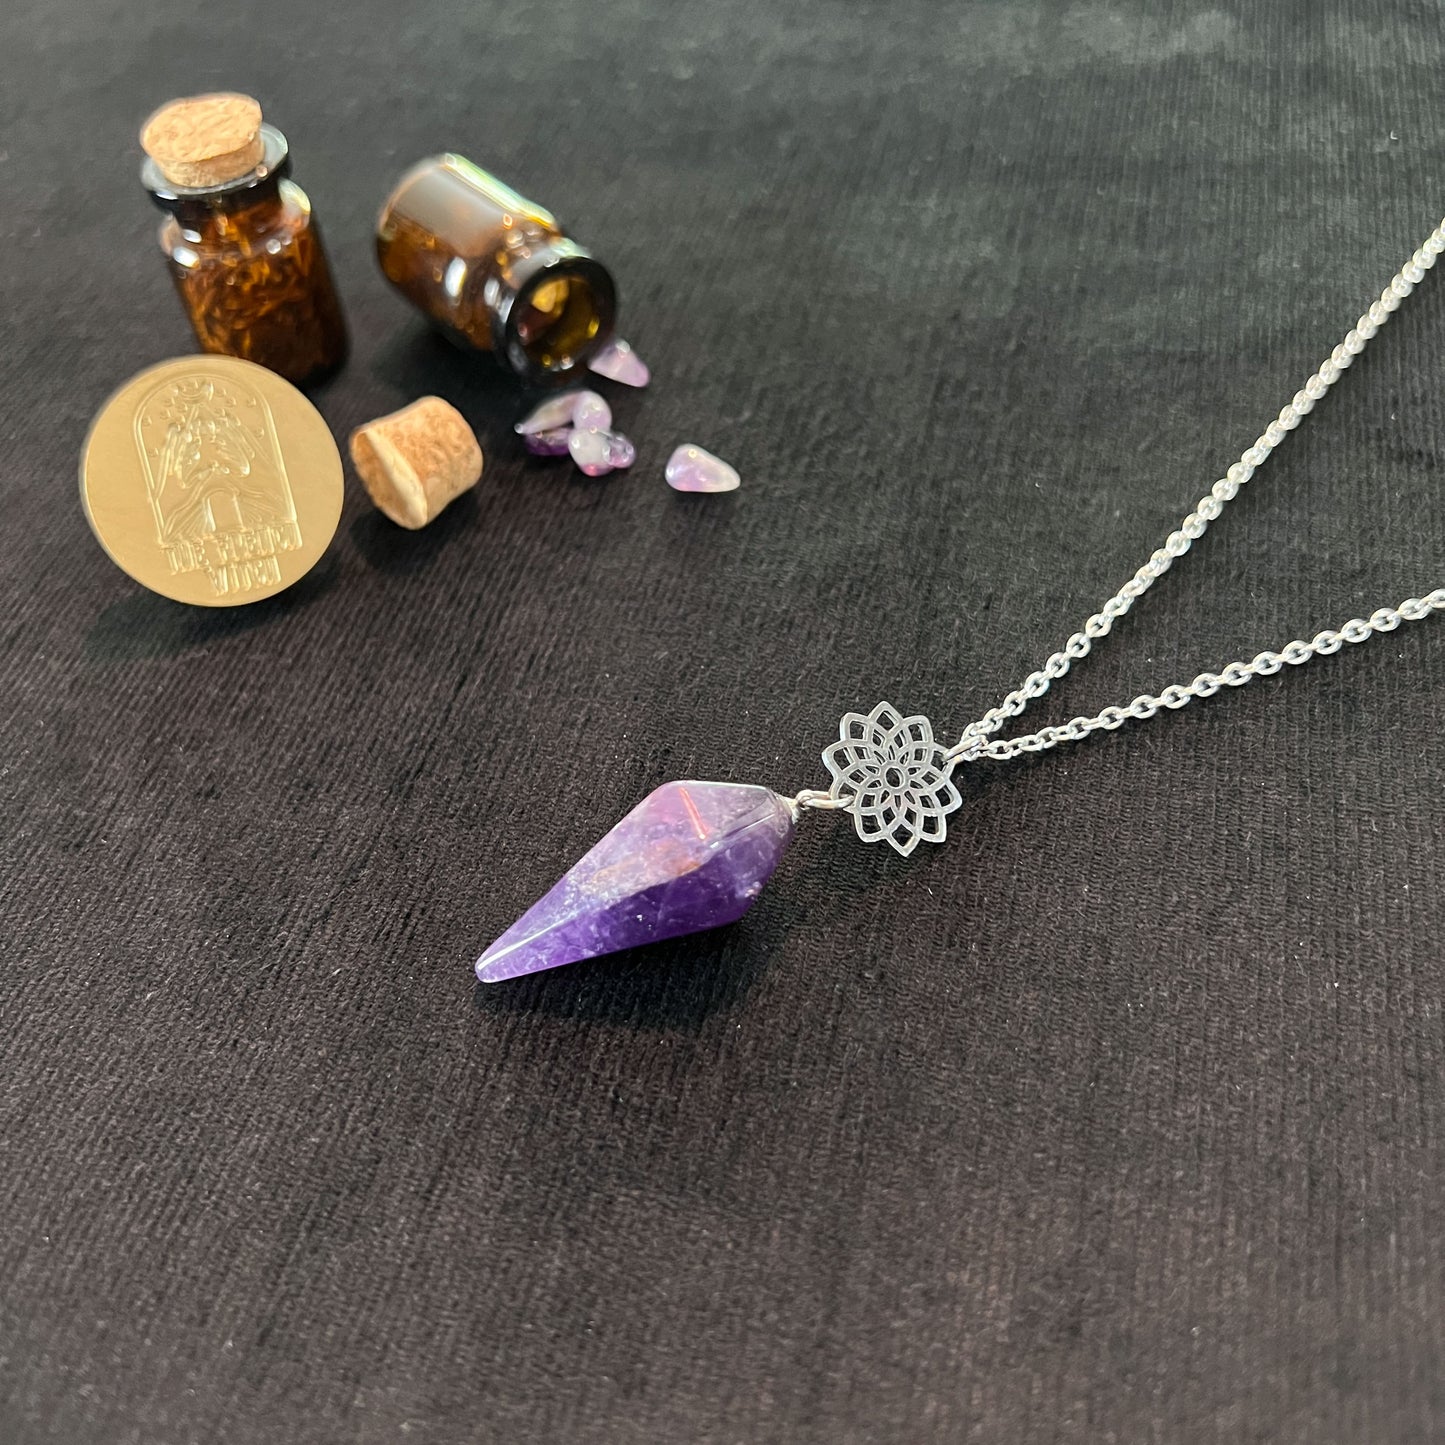 amethyst gemstone crystal pendulum necklace for dowsing divination witch spiritual jewelry